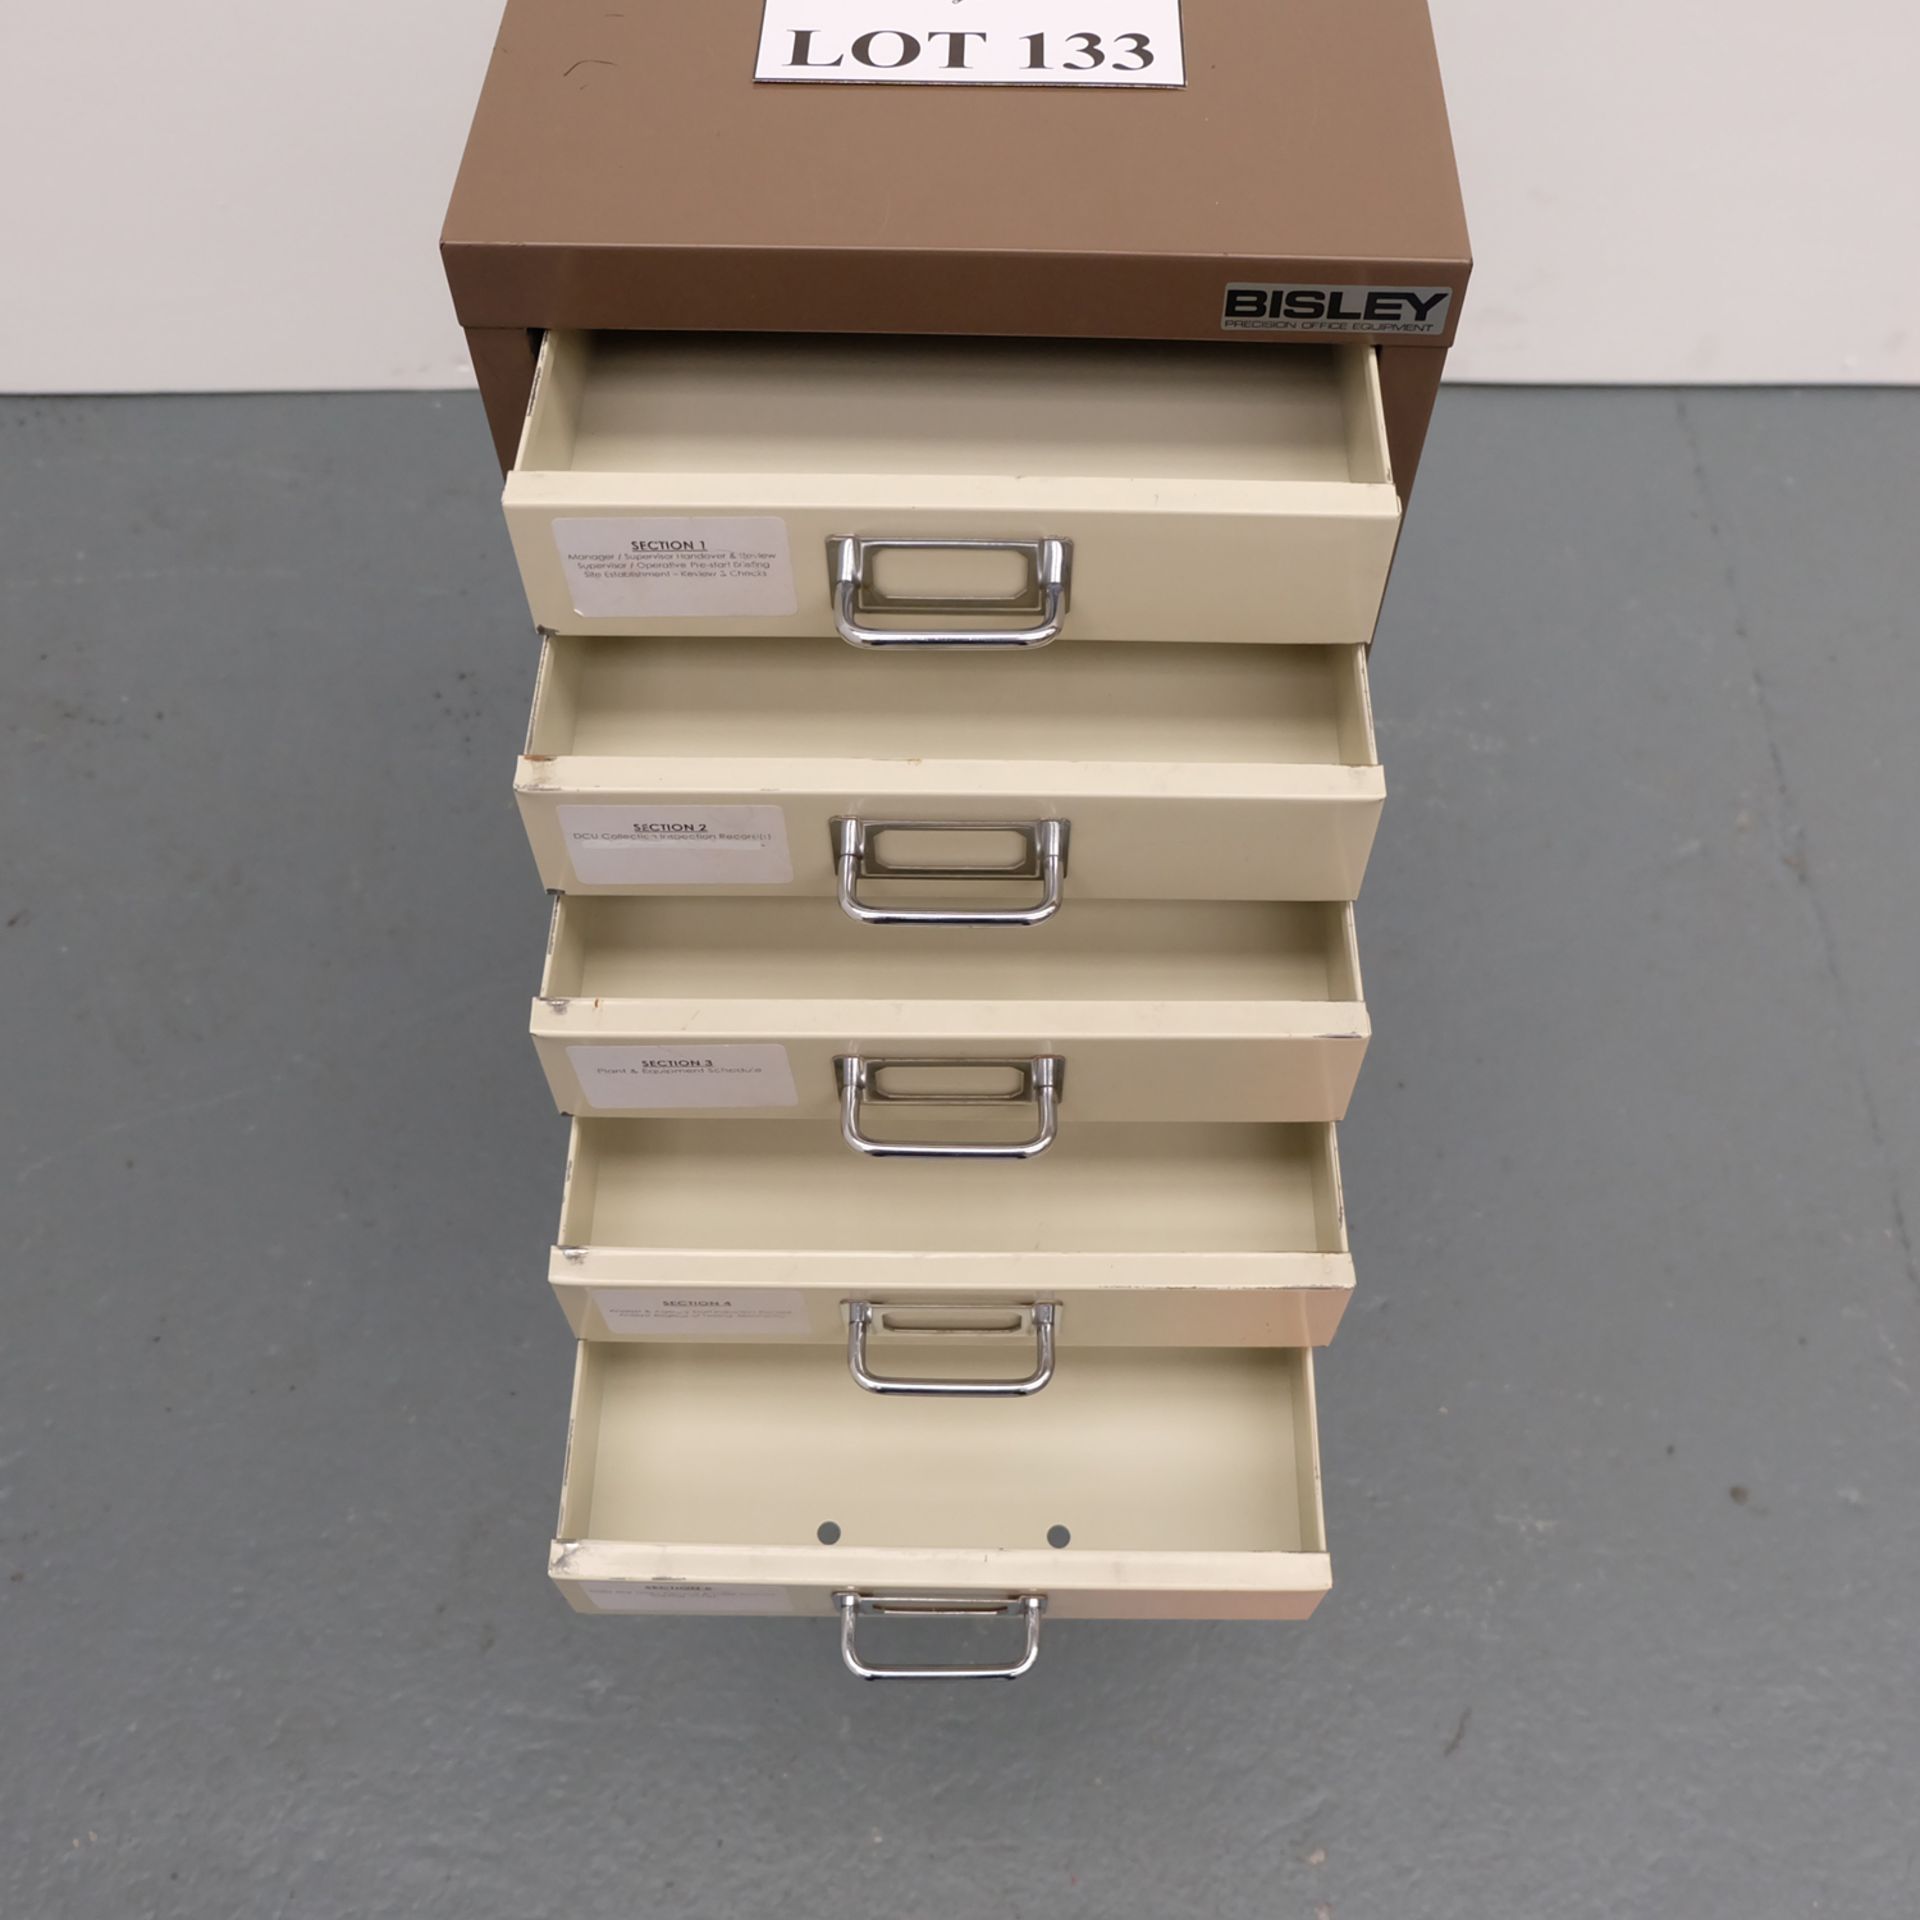 BISLEY Set of Drawers. 280mm x 410mm x 675mm High Approx. - Image 5 of 6